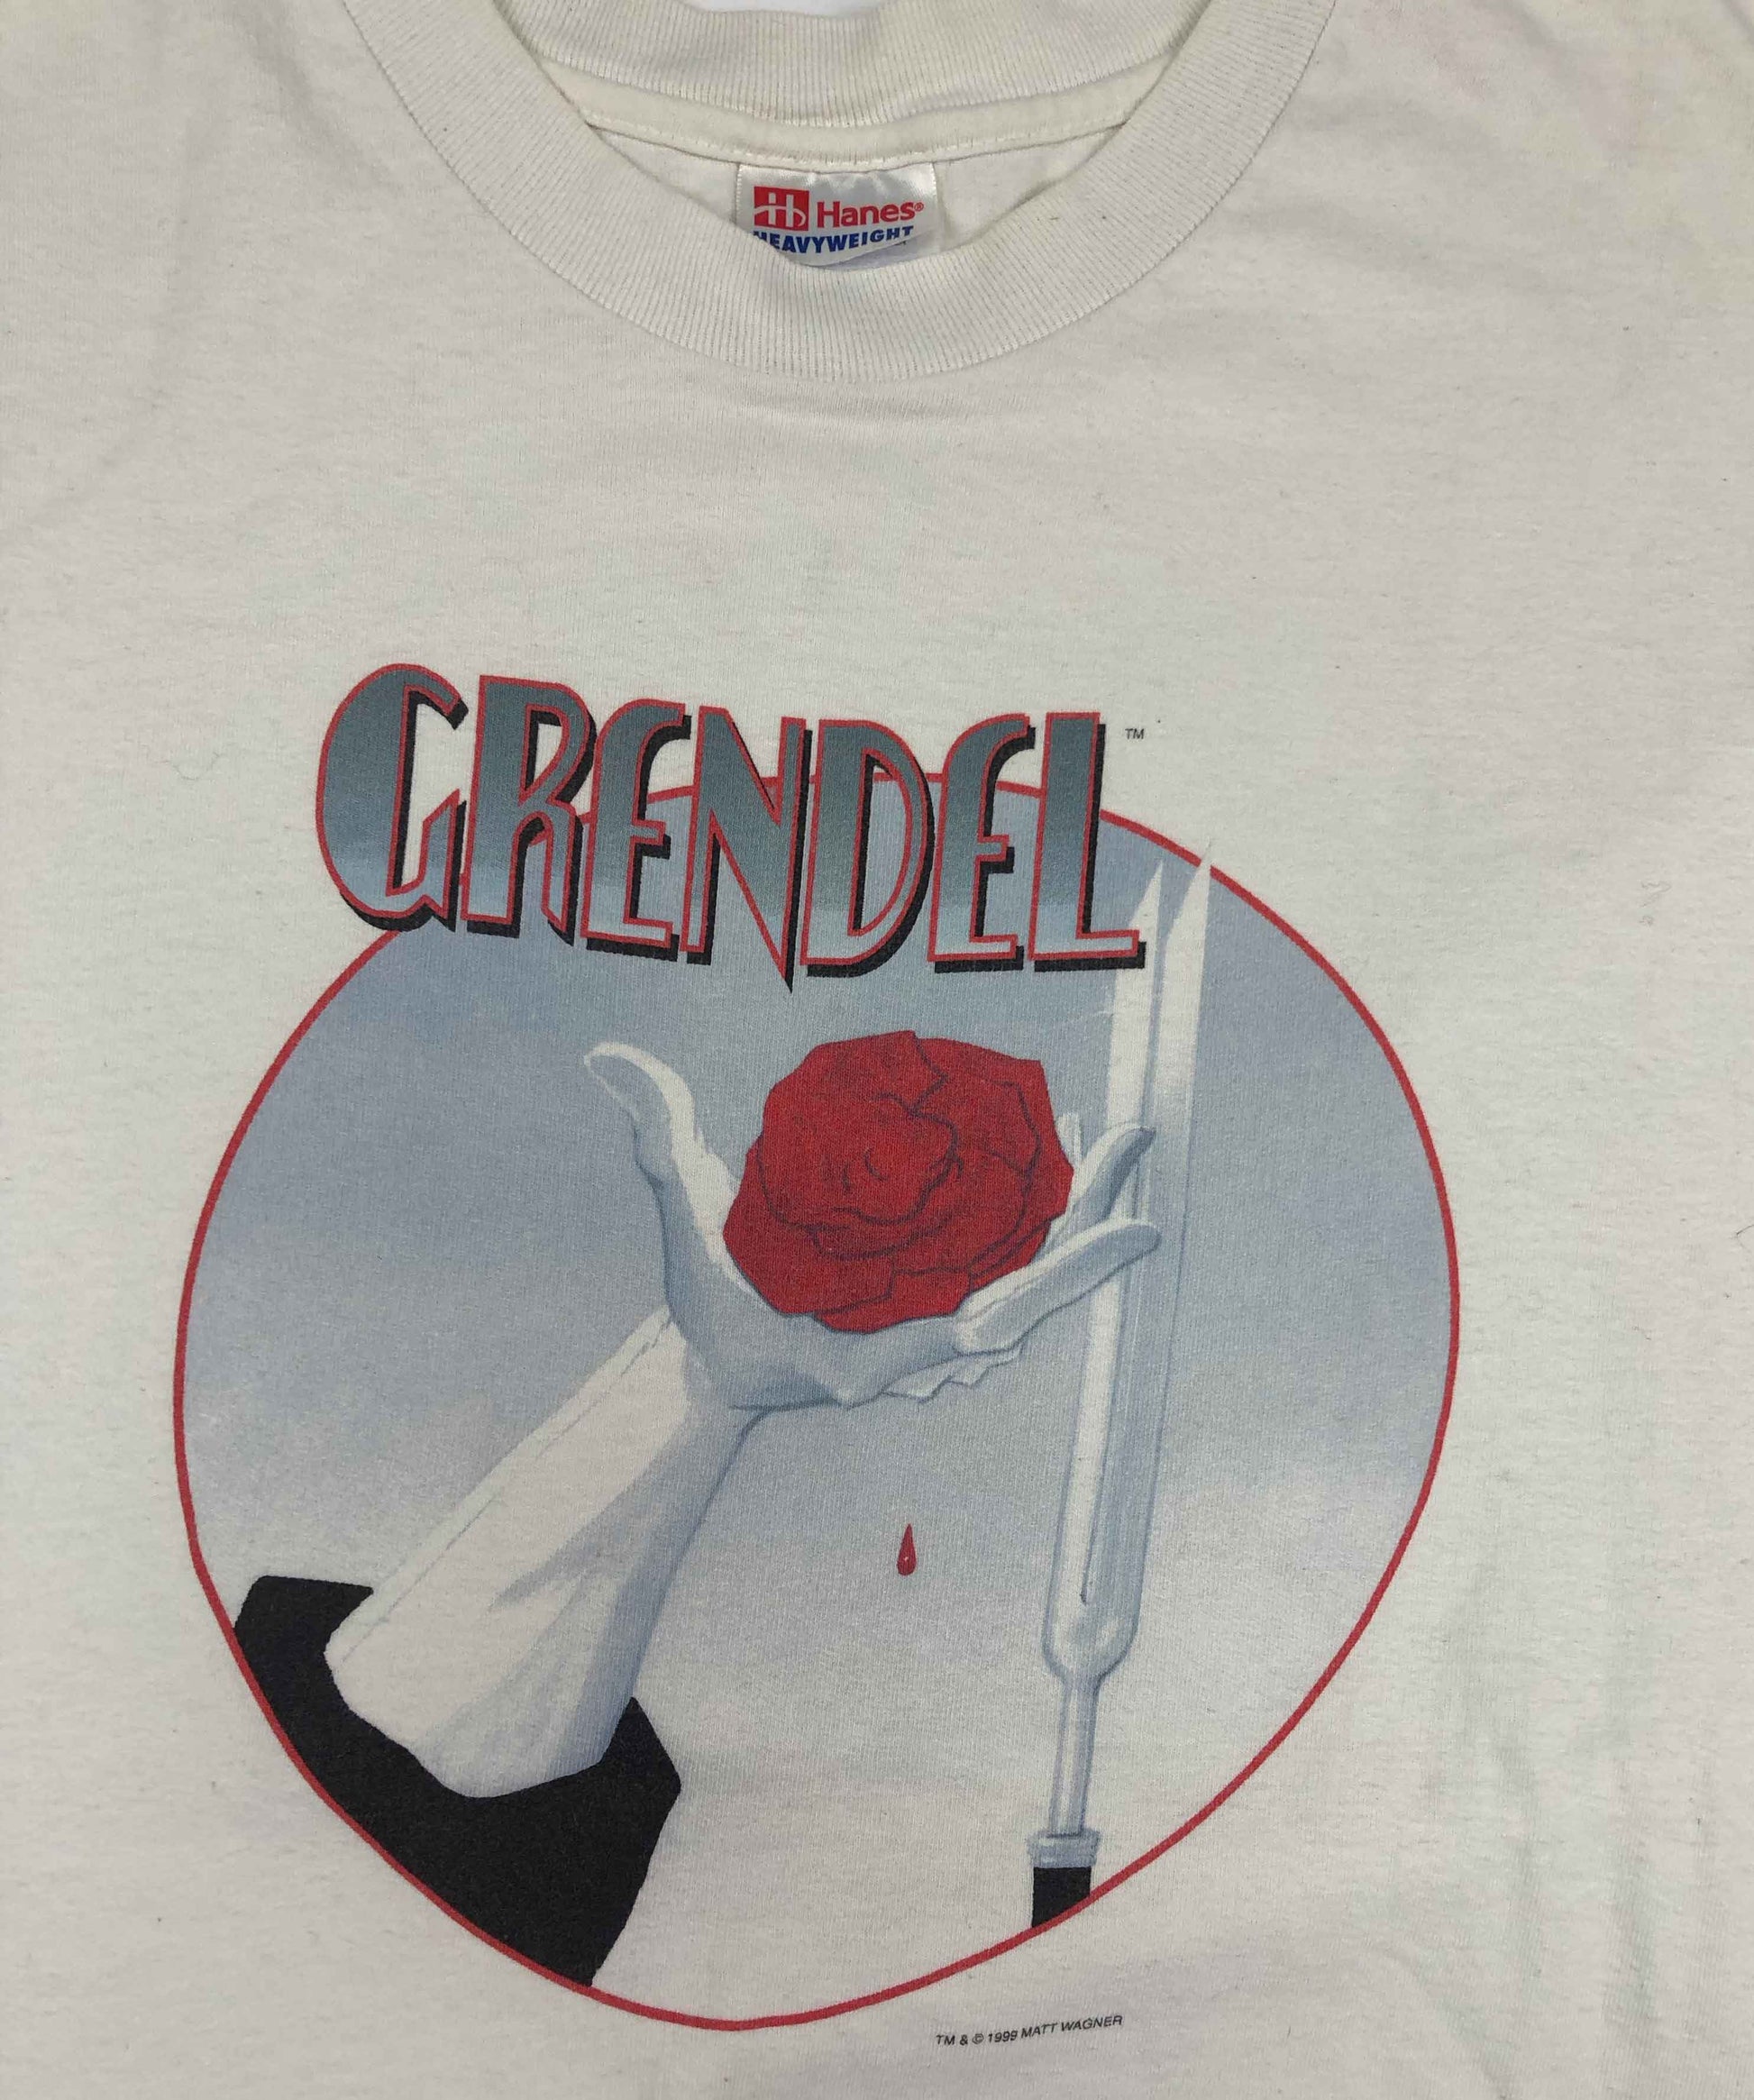 Vintage Comic T-Shirt 1999 Grendel  Grendel is a long-running series of comic books originally created by American author Matt Wagner. Grendel was the masked identity of Hunter Rose, a successful author. As Grendel, he worked as an assassin before taking control of New York City's organized crime. The tee has a good vintage condition.